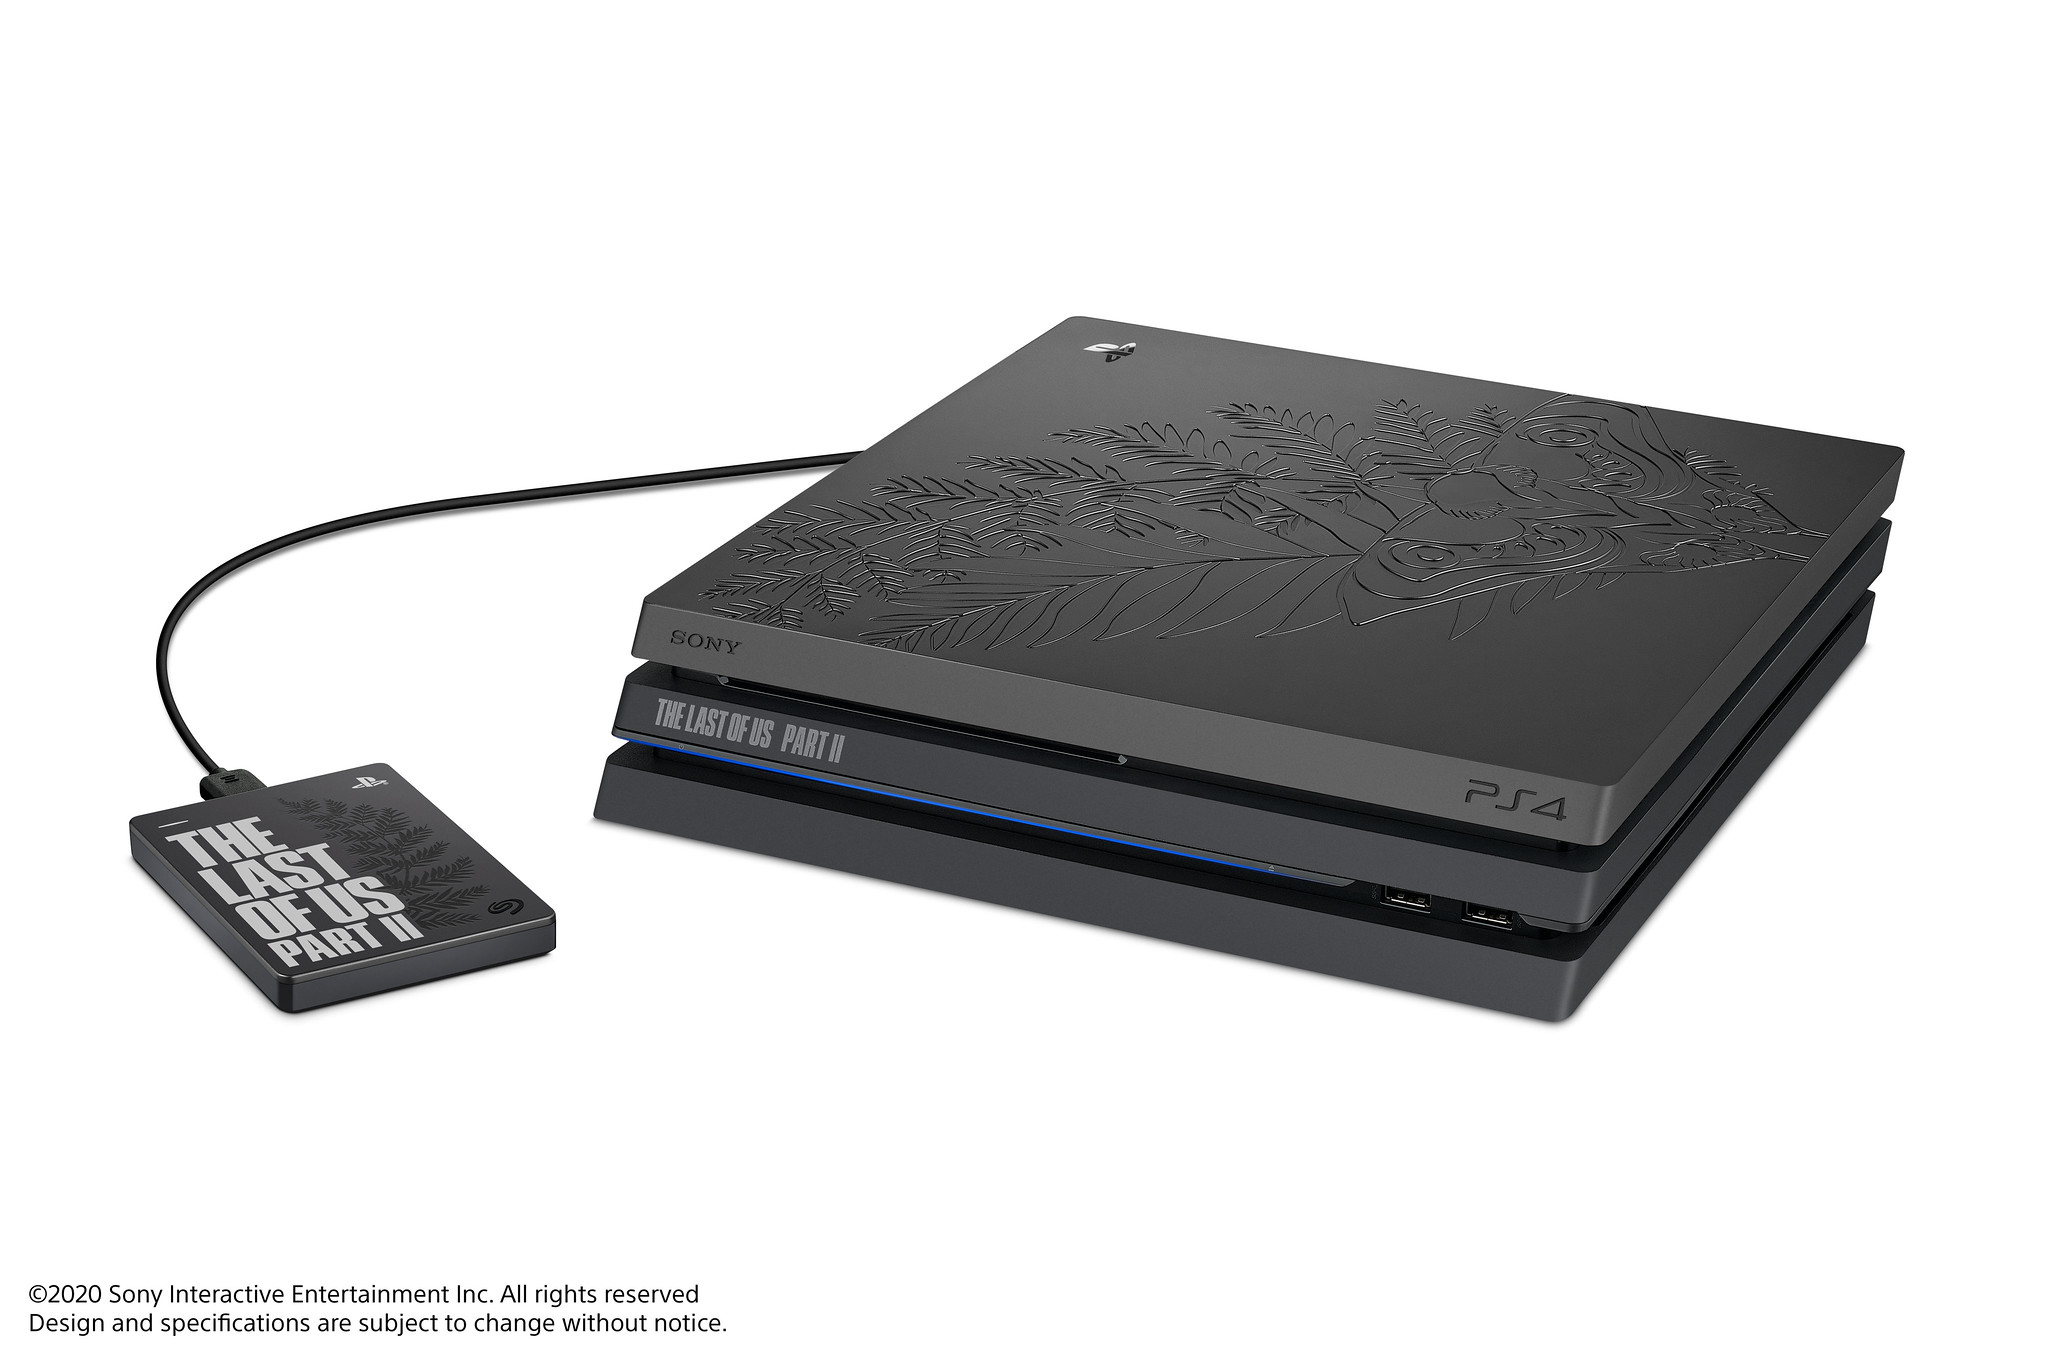 The Last of Us Part II gets limited edition PS4, Game Drive